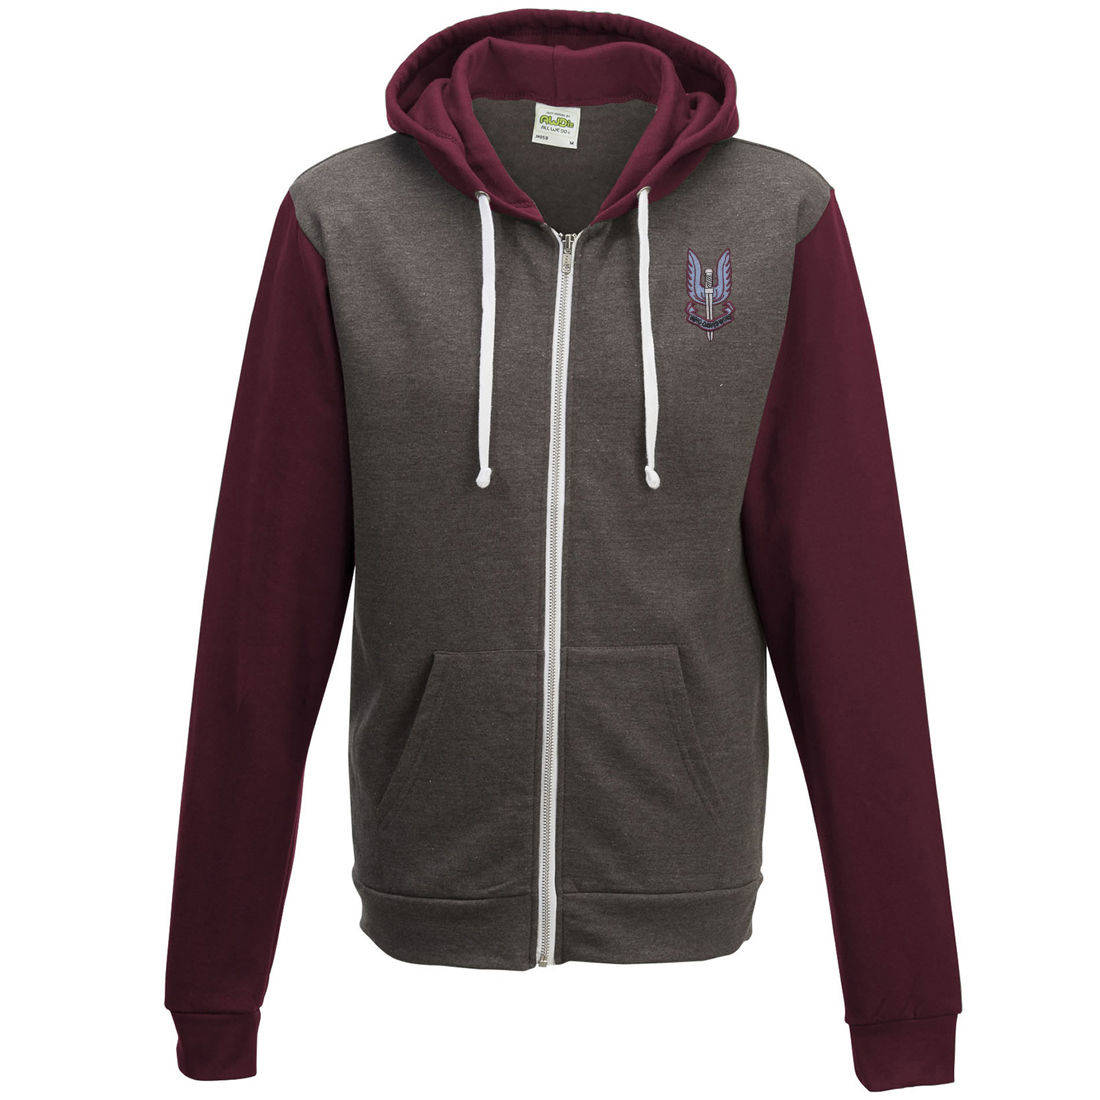 Two-Tone Zip Up Hoody - Jackets and Overcoats - Clothing - The Airborne